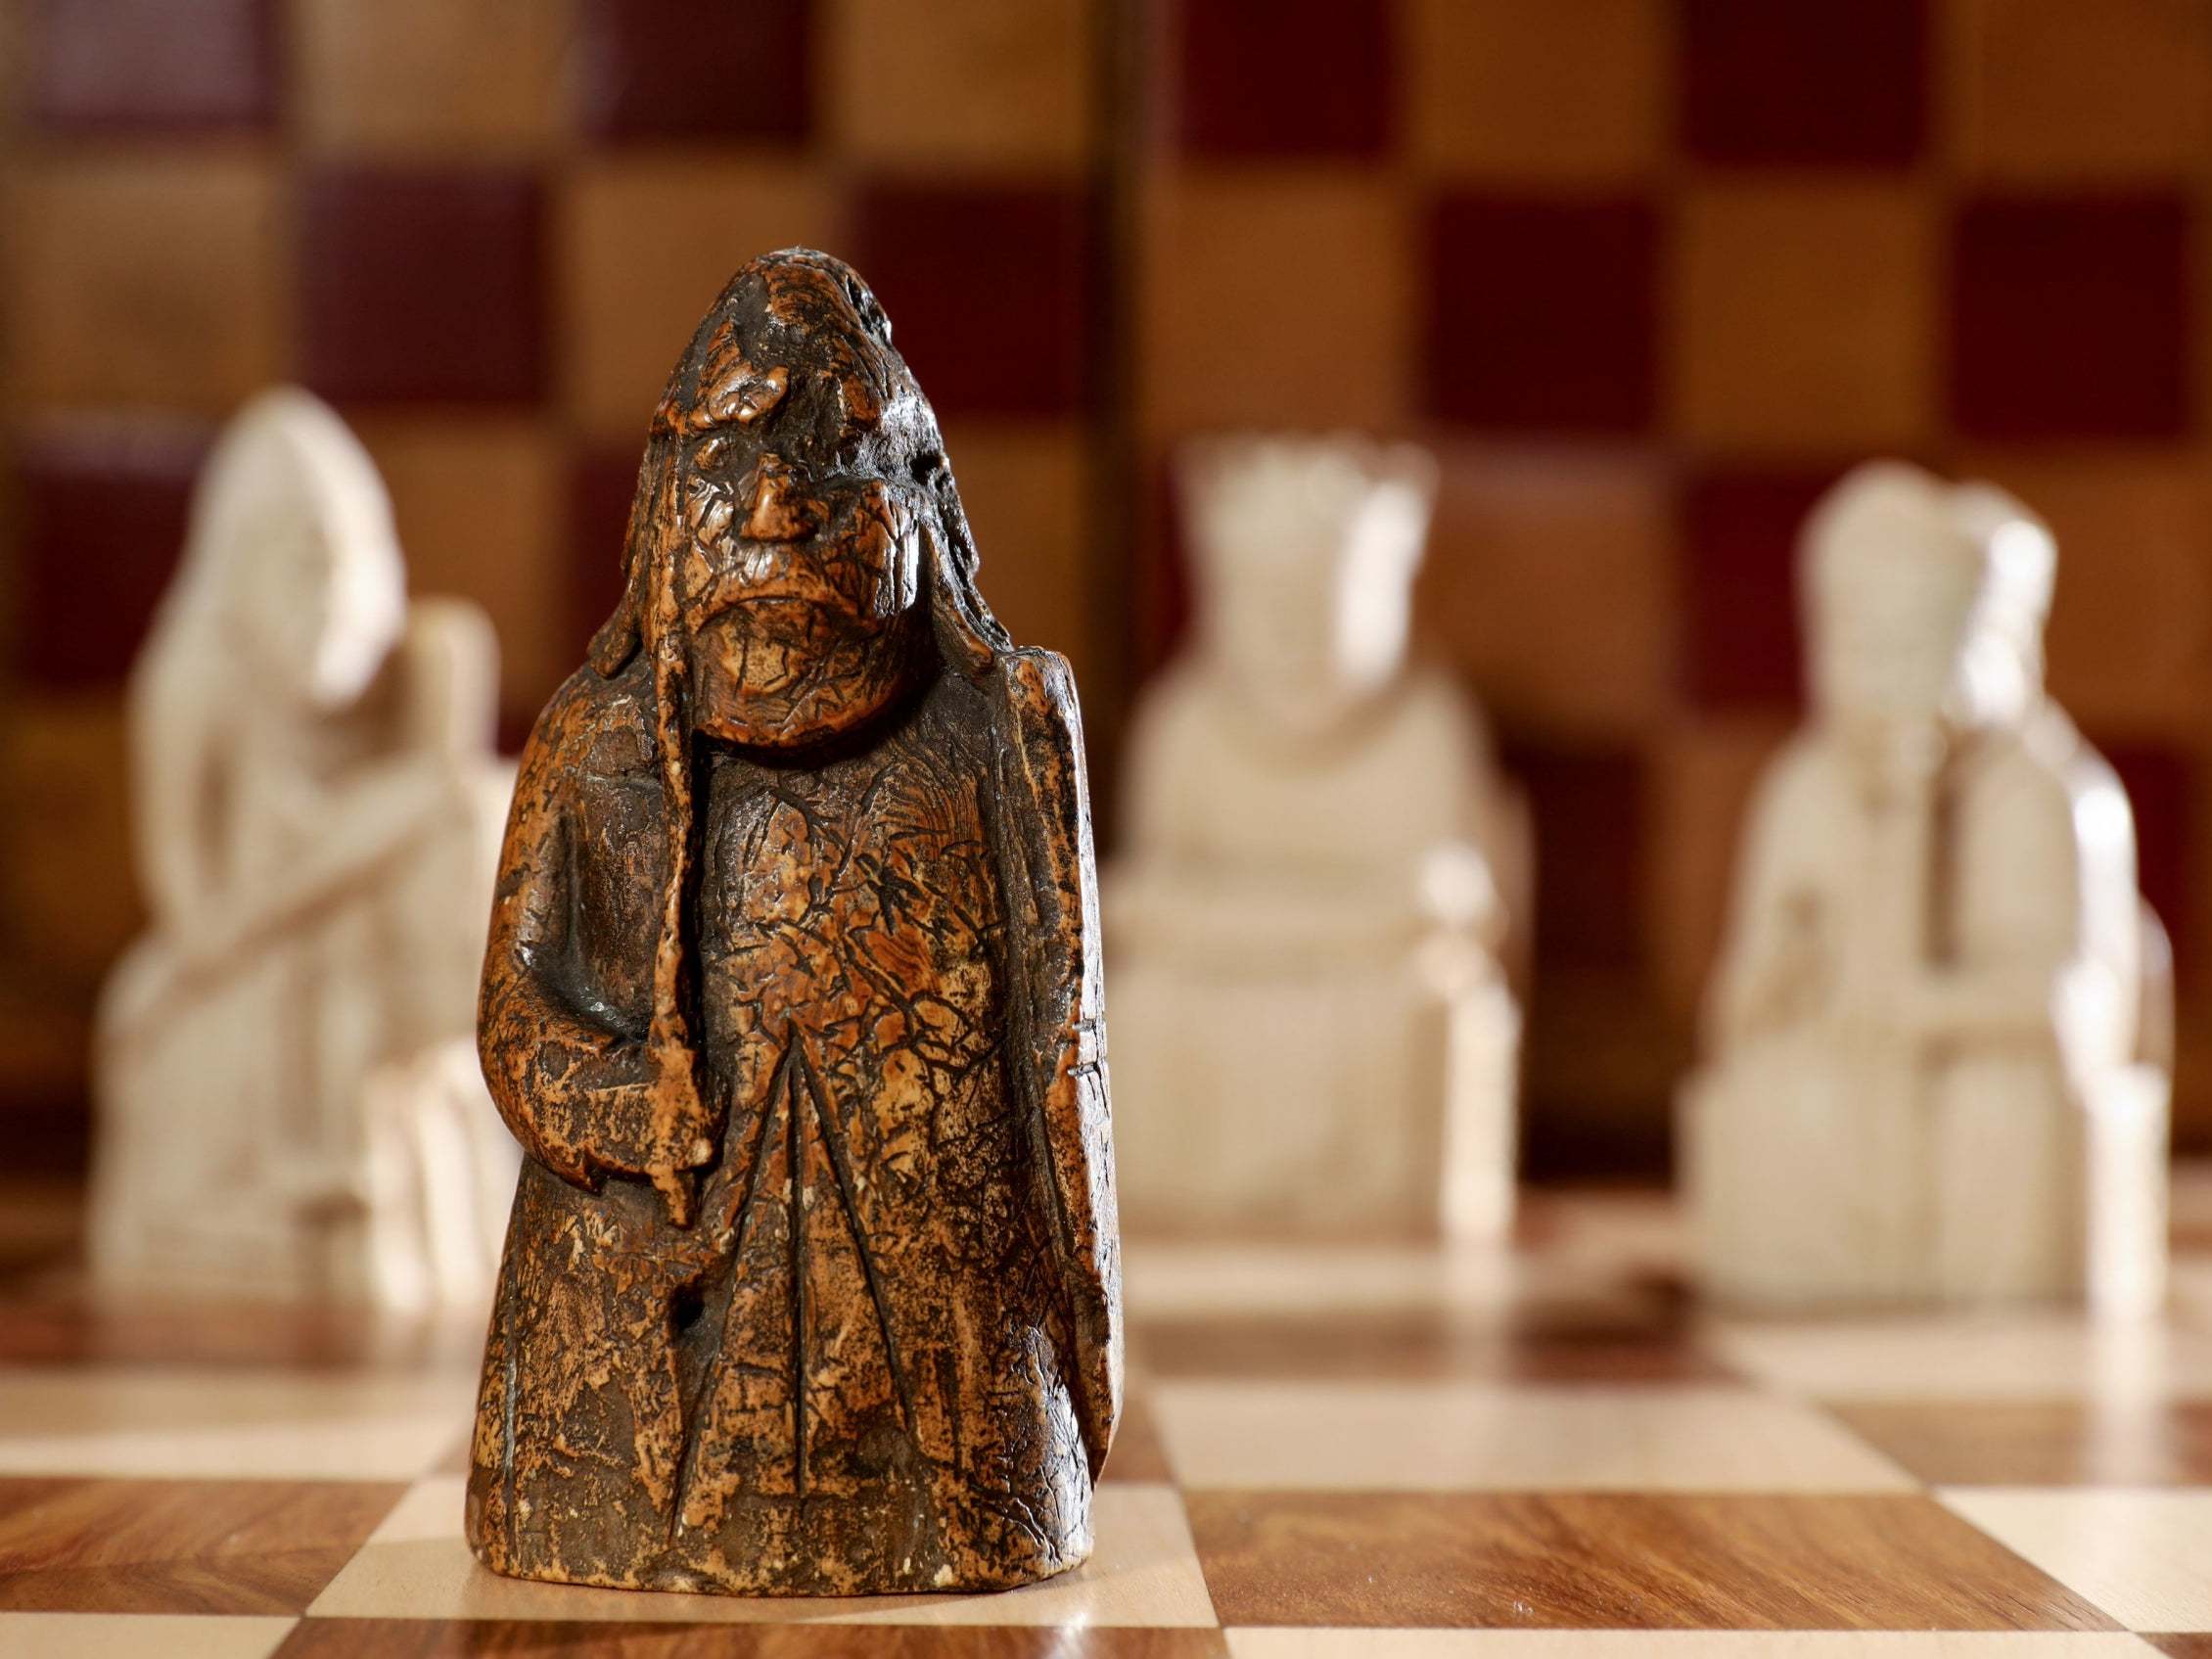 The newly discovered medieval chess piece which could fetch £1m at auction